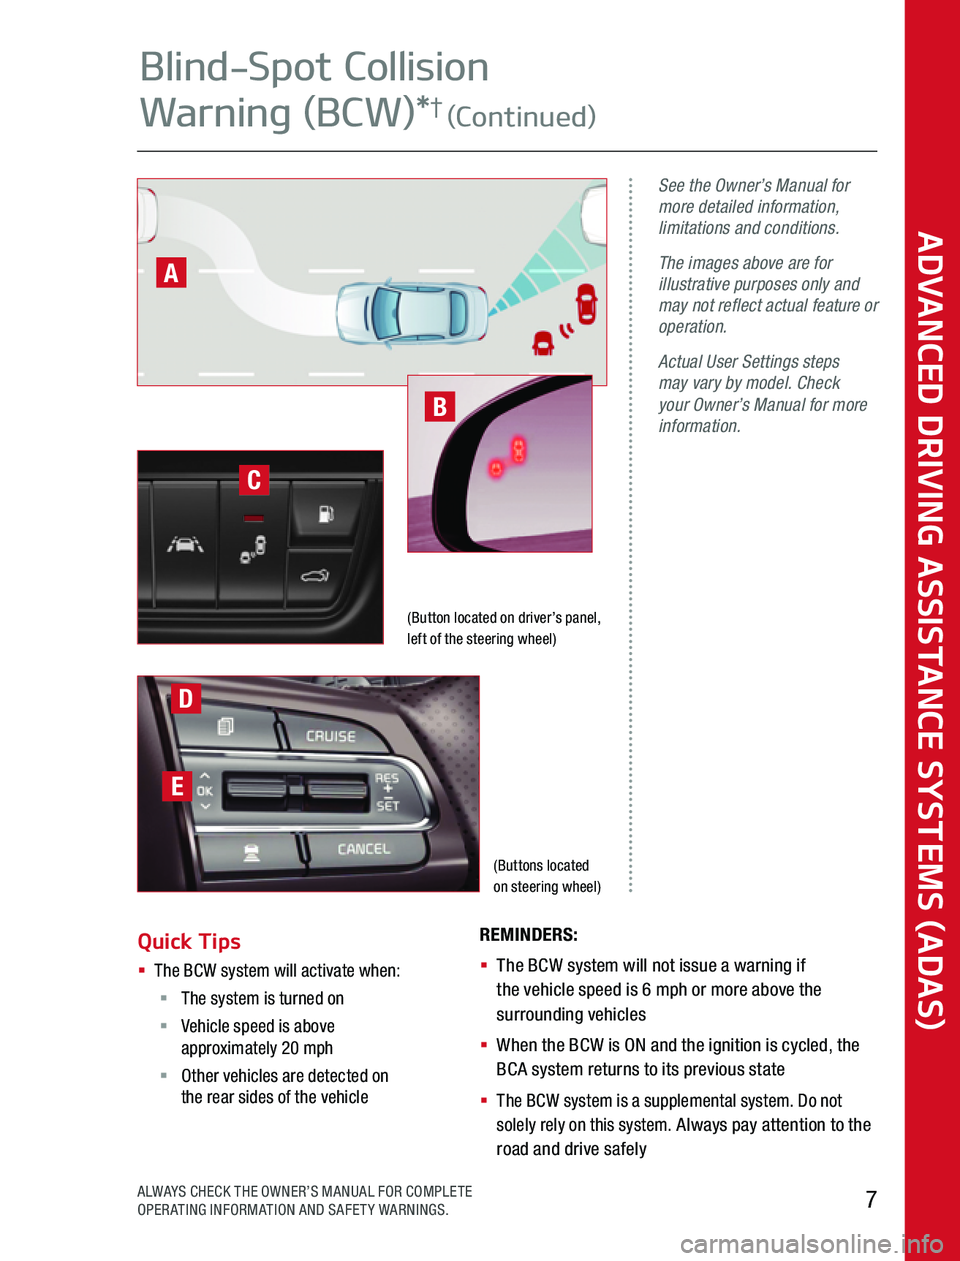 KIA OPTIMA PHEV 2020  Advanced Driving Assistance System (Buttons located  on steering wheel)
See the Owner’s Manual for more detailed information, limitations and conditions.
The images above are for illustrative purposes only and may not reflect actual 